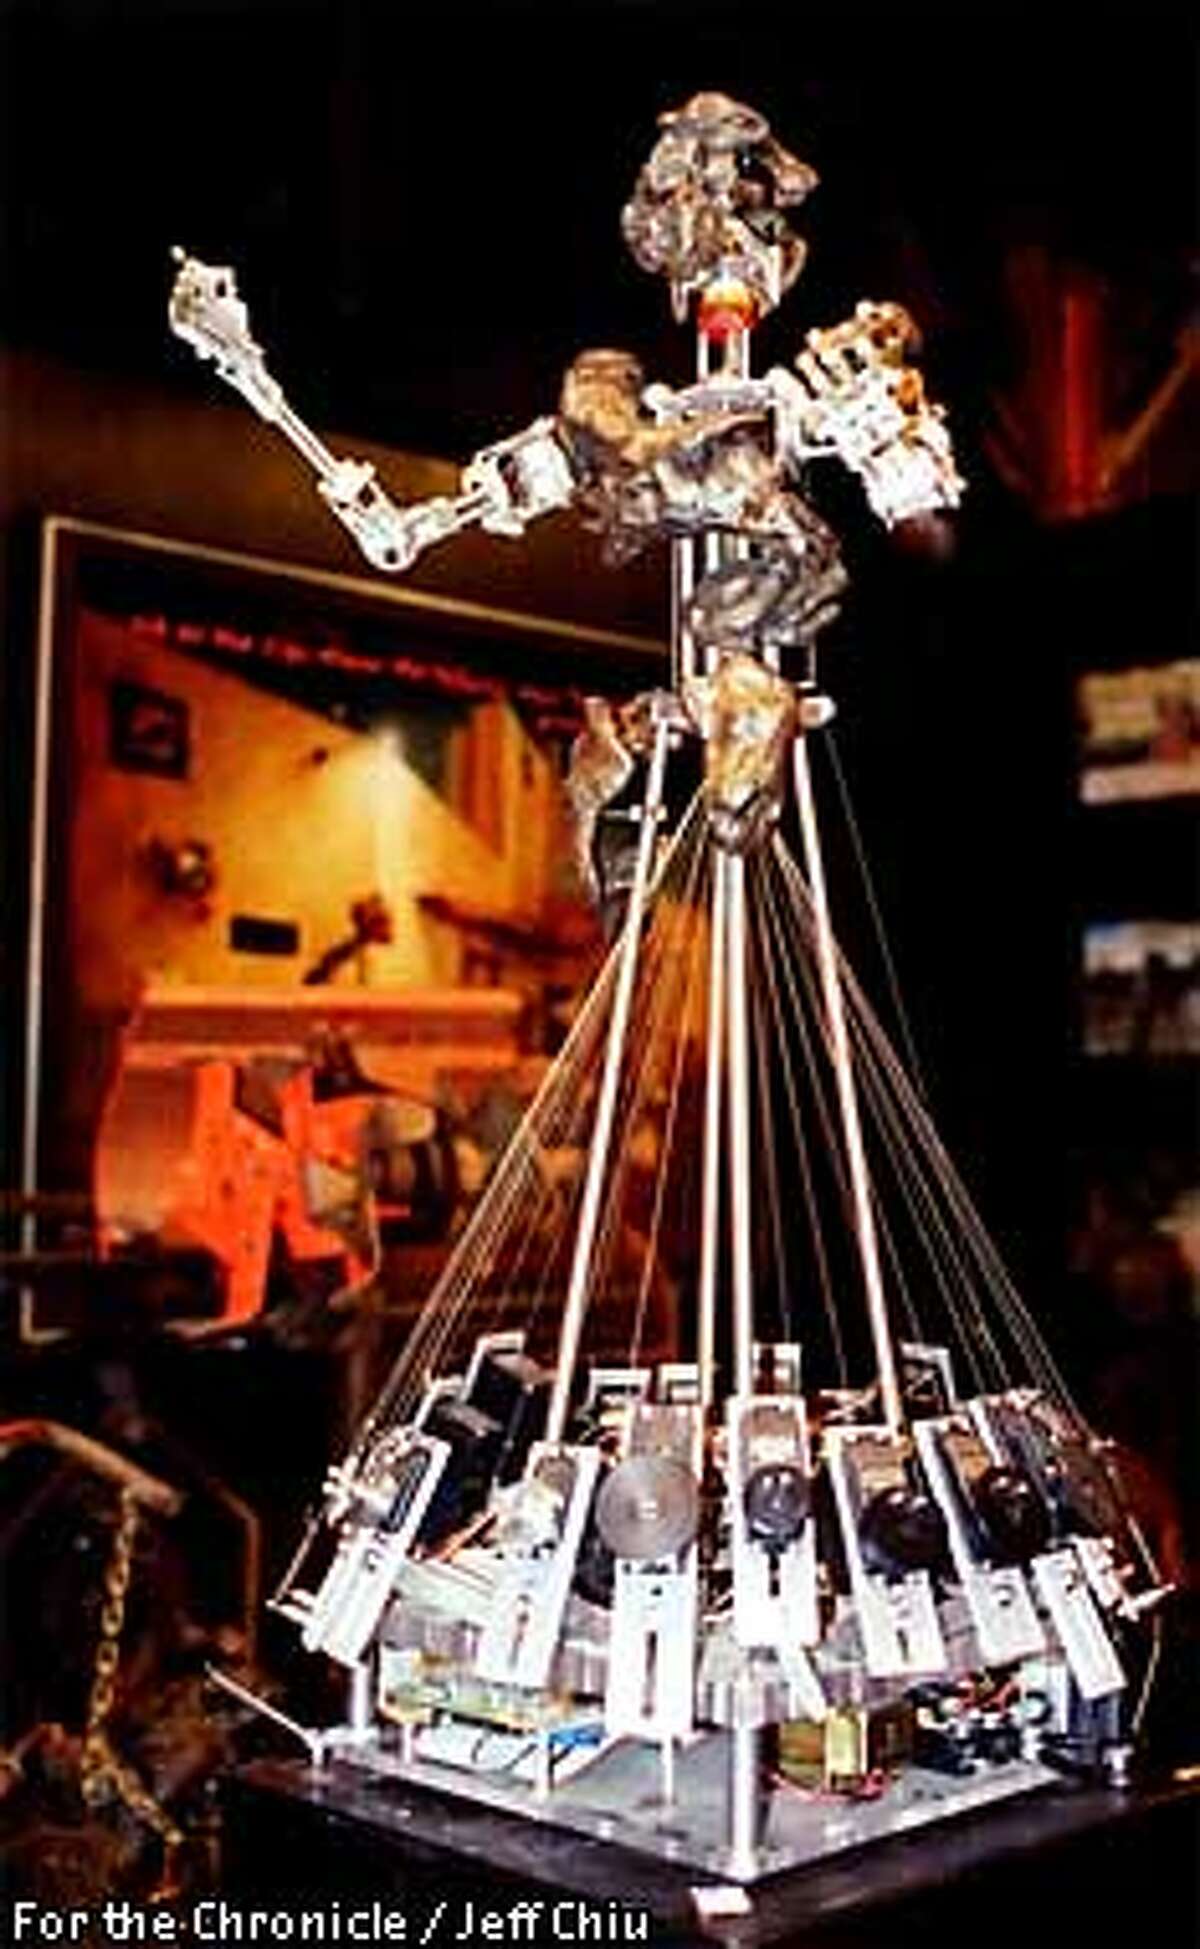 MECHANICAL ANIMAL: Robot Slave 1, designed by Carl Pisaturo of Omnicircus, performed during the group's ``Scabaret.'' For the Chronicle by Jeff Chiu